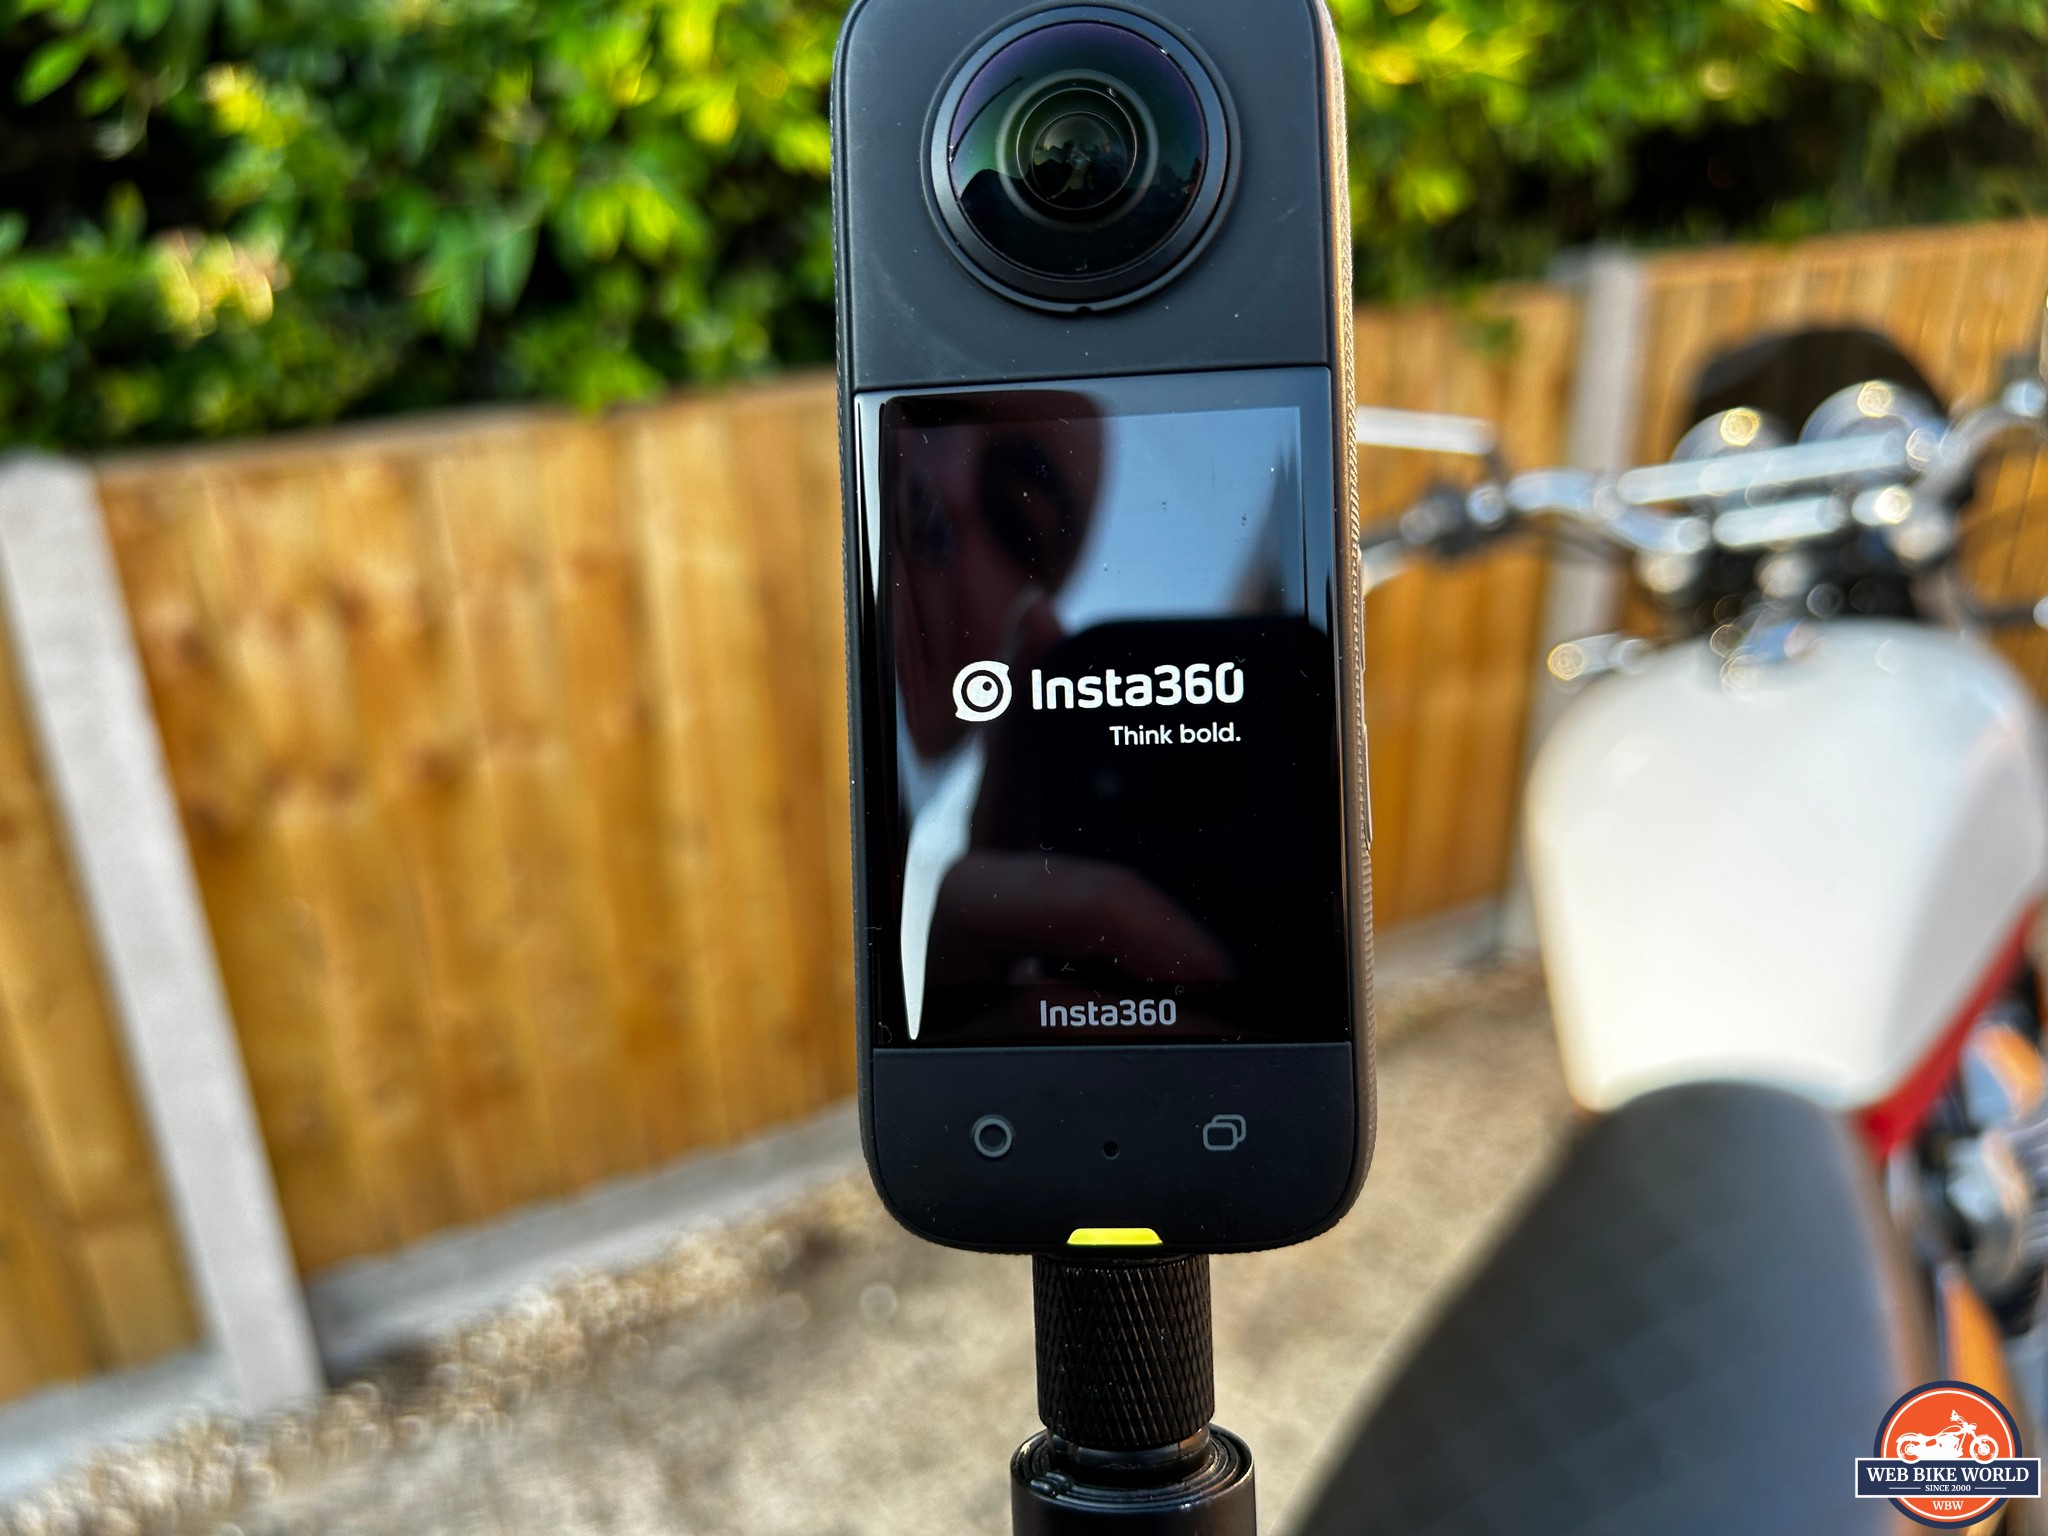 Insta360 X3 Action Camera Review: The ultimate bike camera with 2 major  flaws - Bike Shop Girl